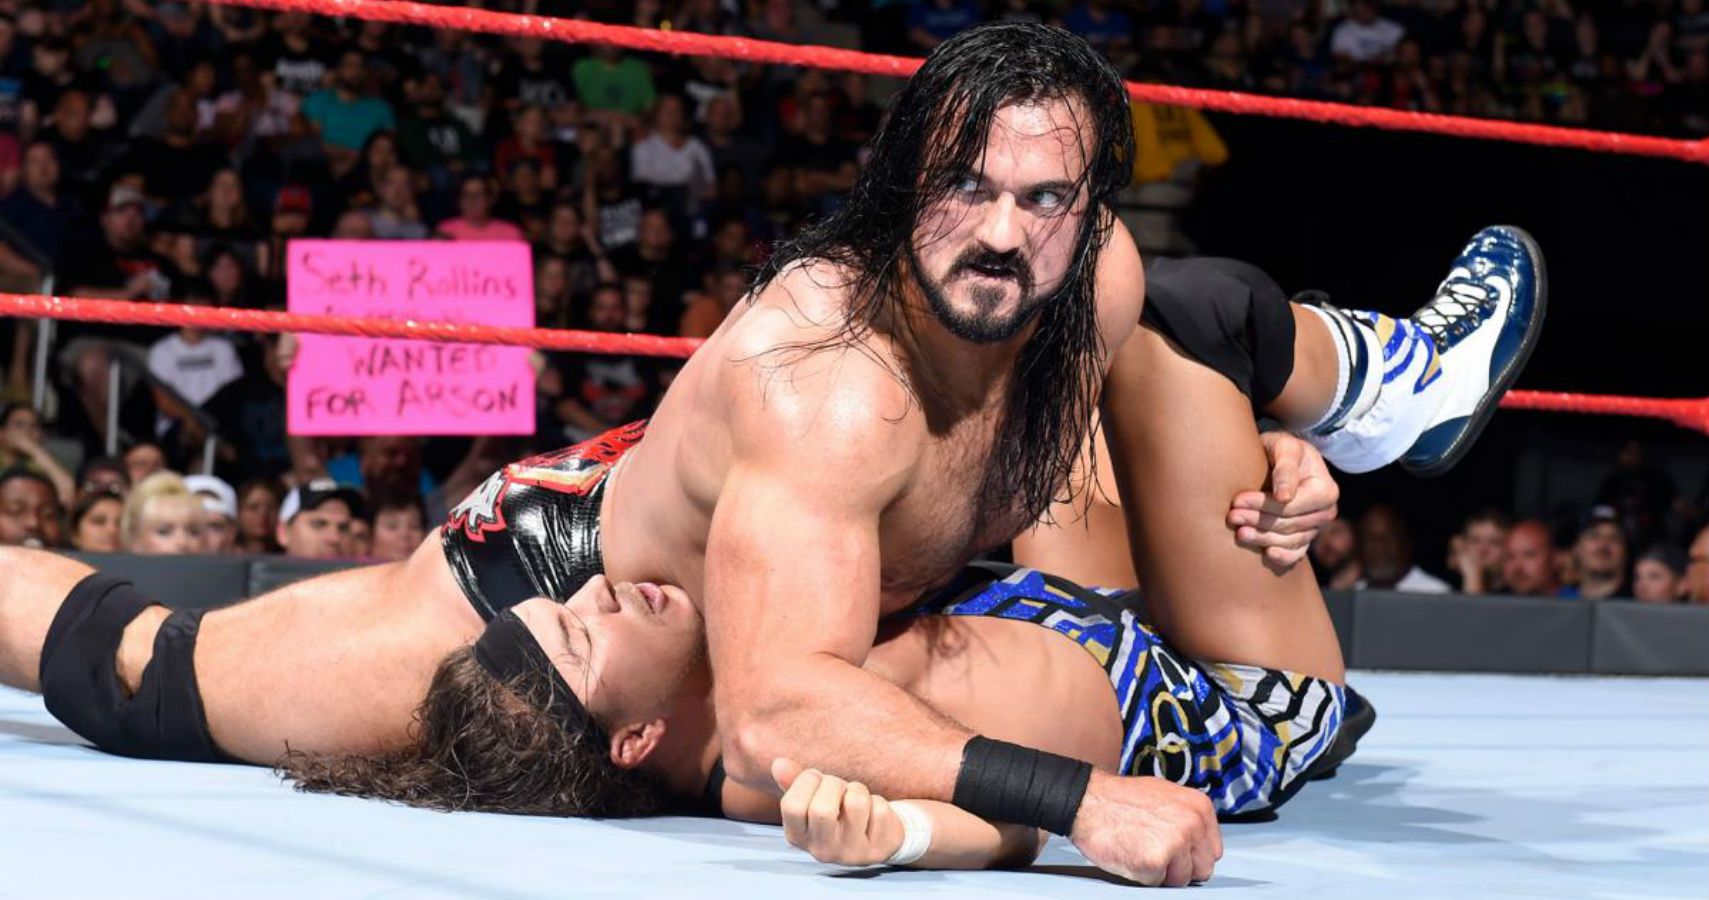 How The Undertaker Inspired A Young Drew McIntyre